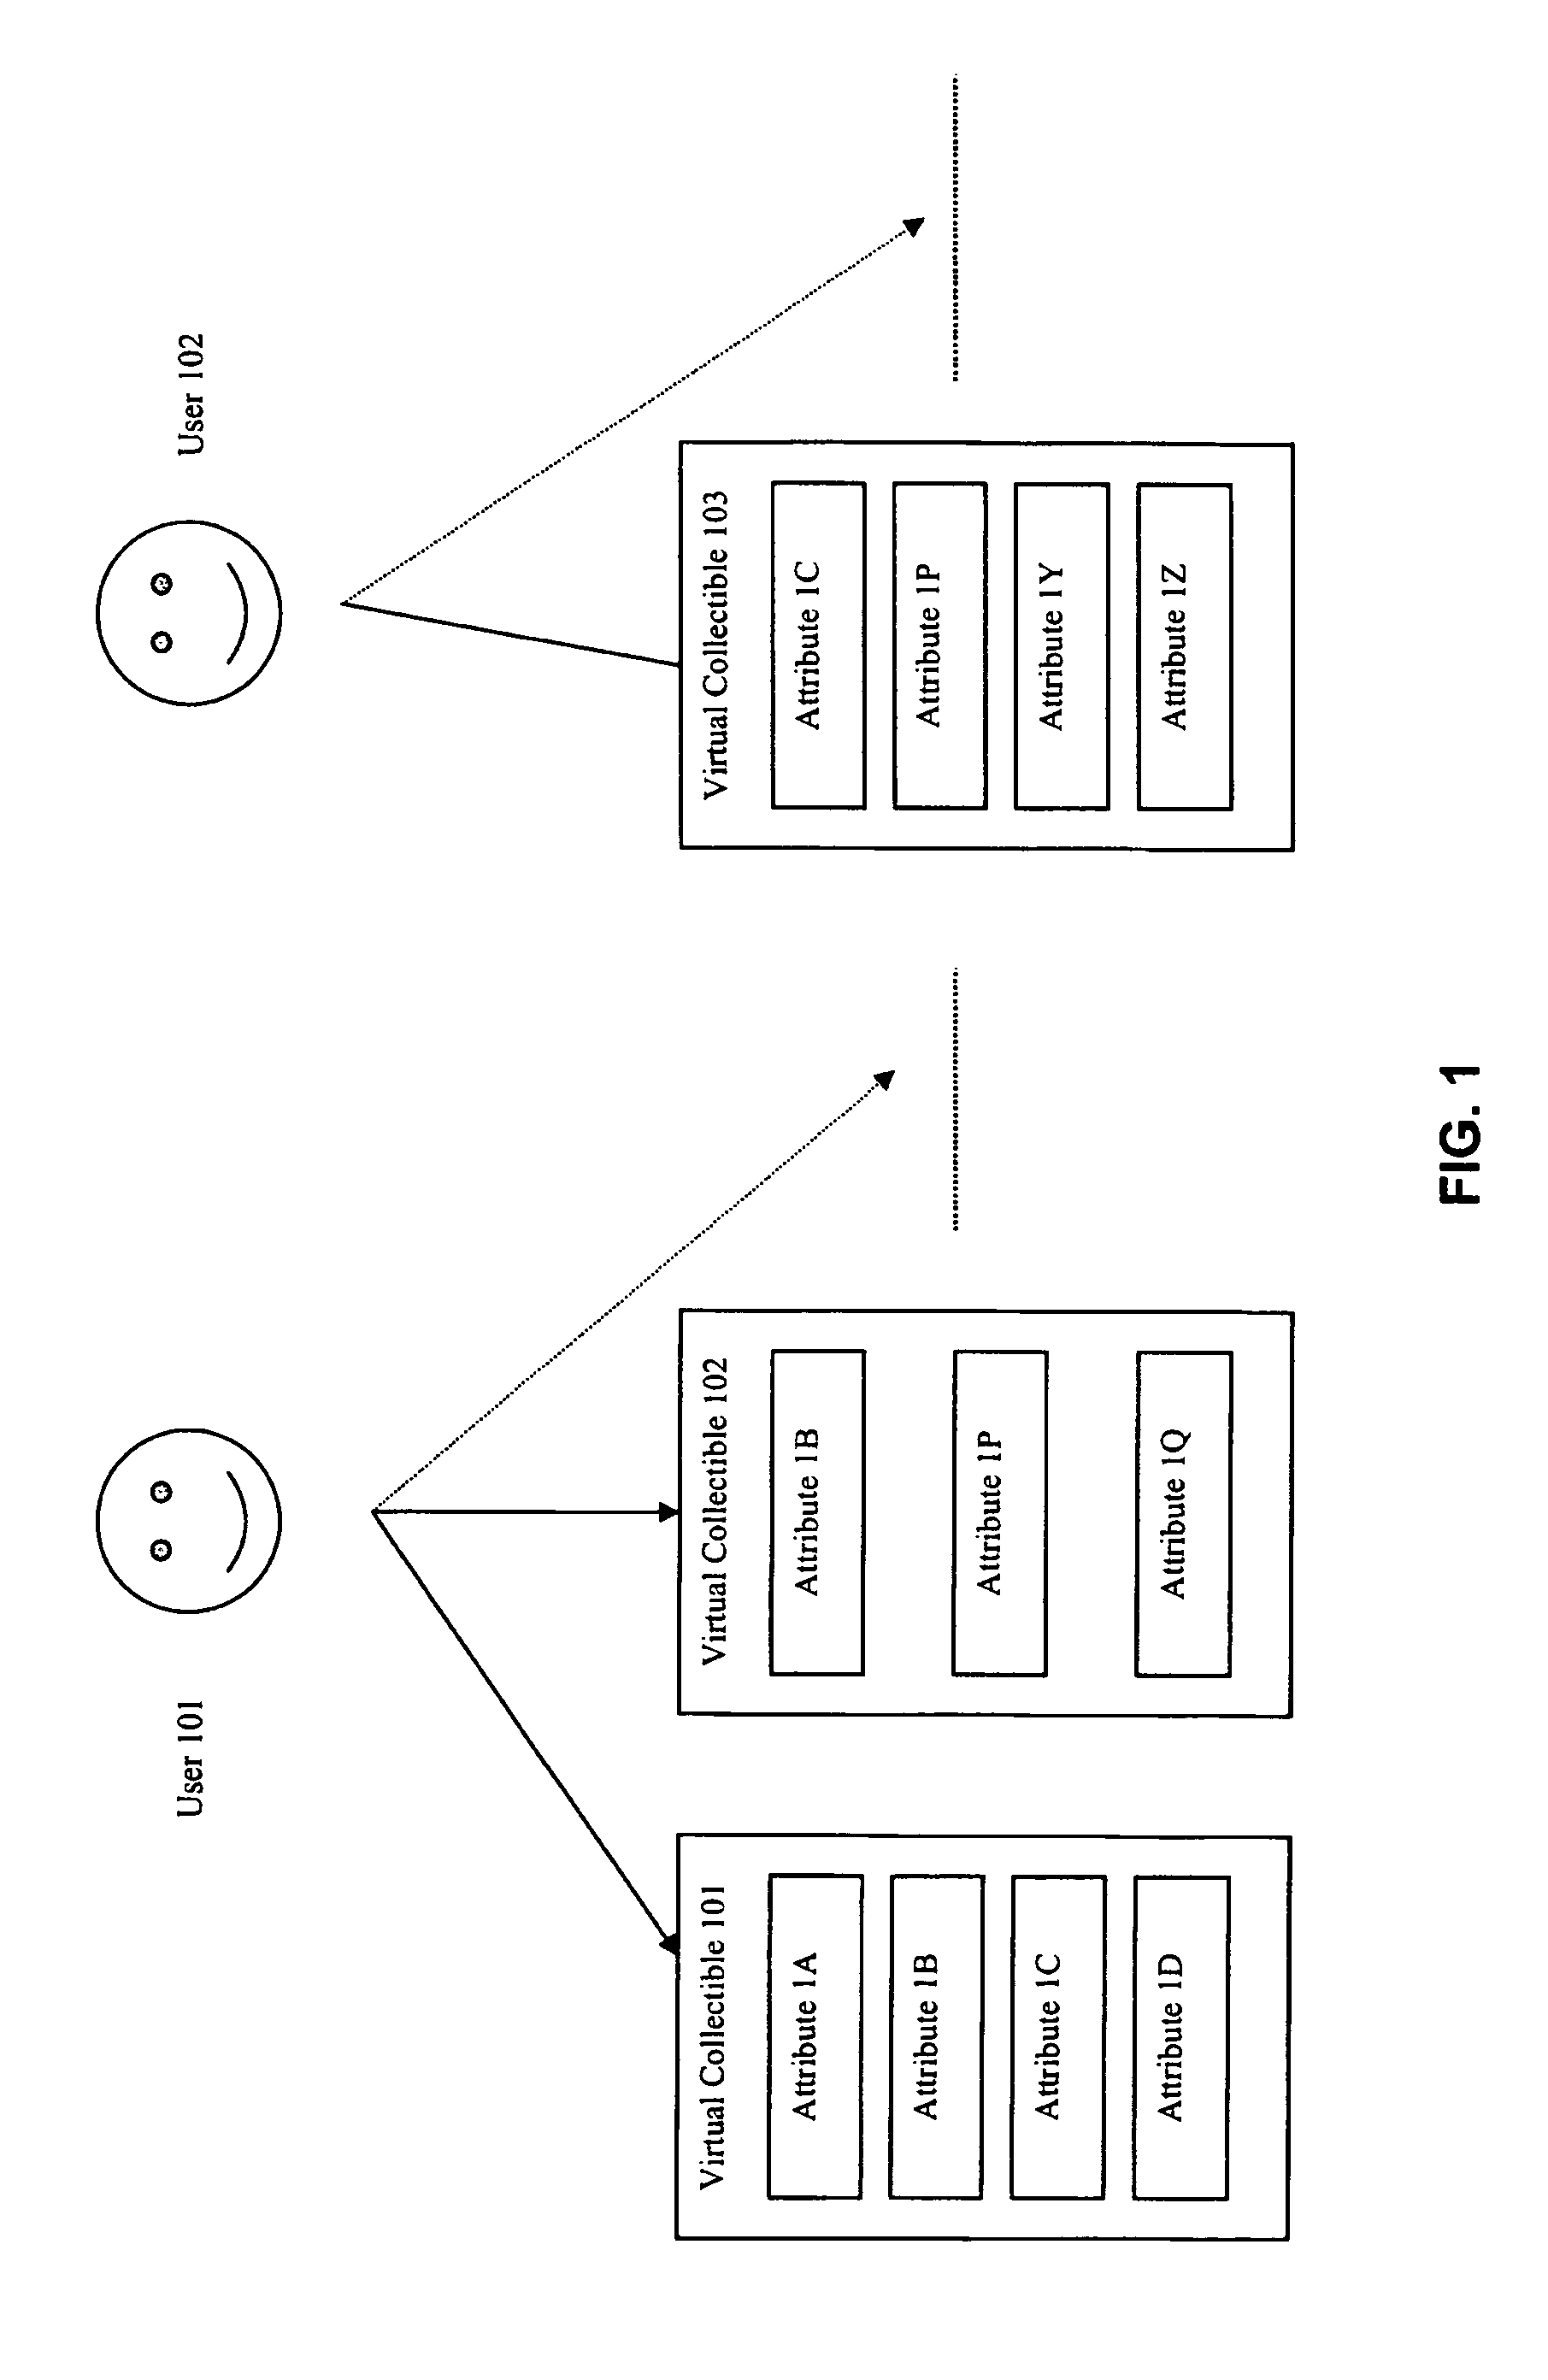 Method and apparatus for distributing virtual goods over the internet